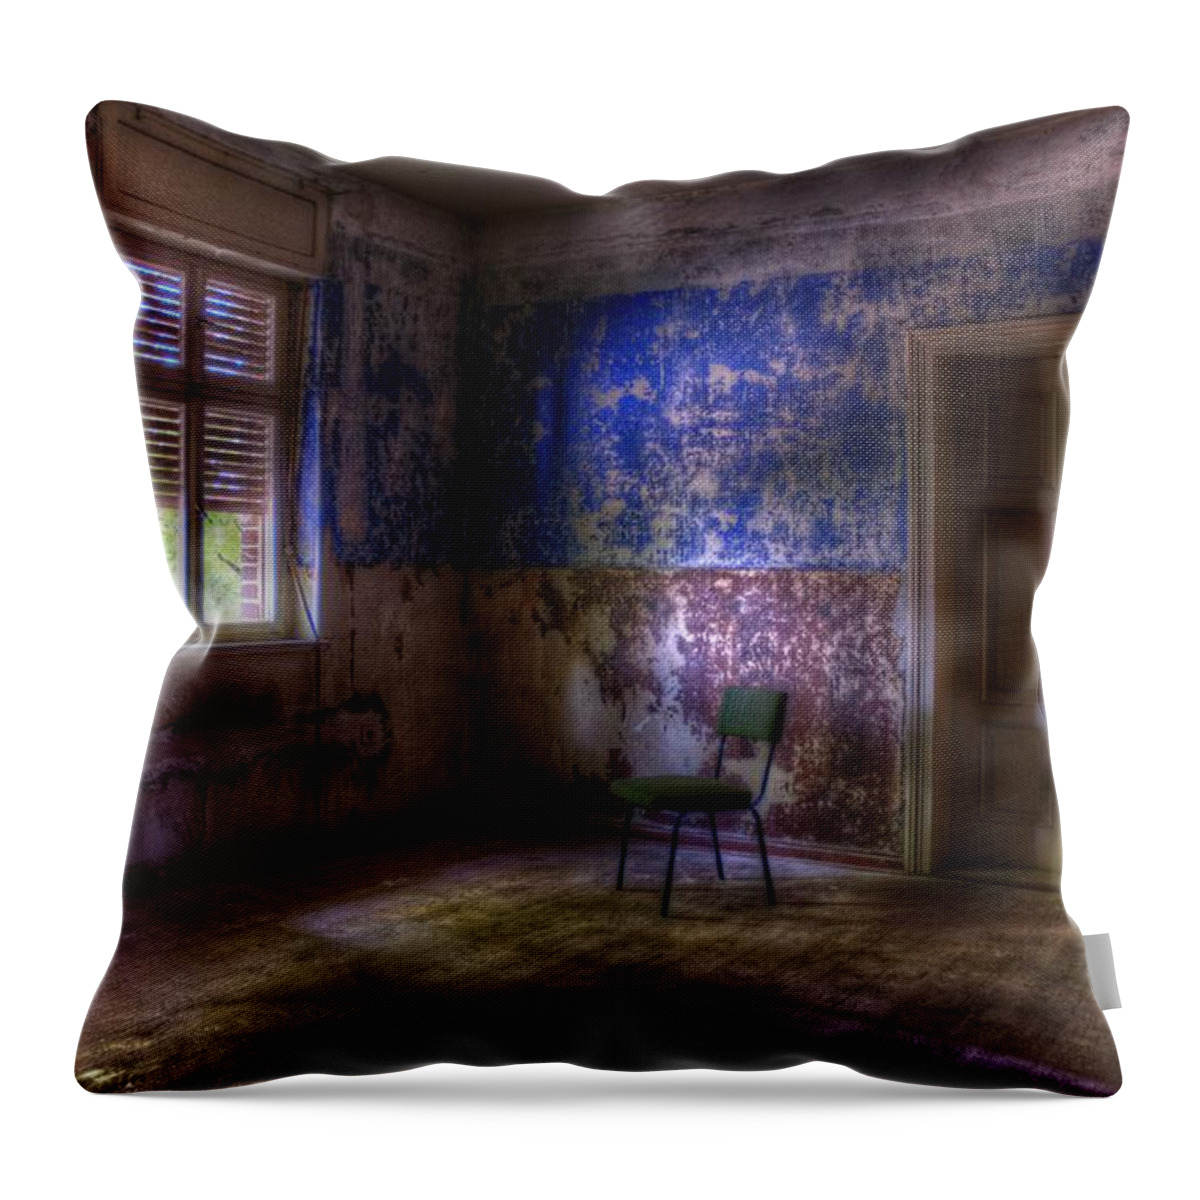 Old Throw Pillow featuring the digital art Blue room #2 by Nathan Wright